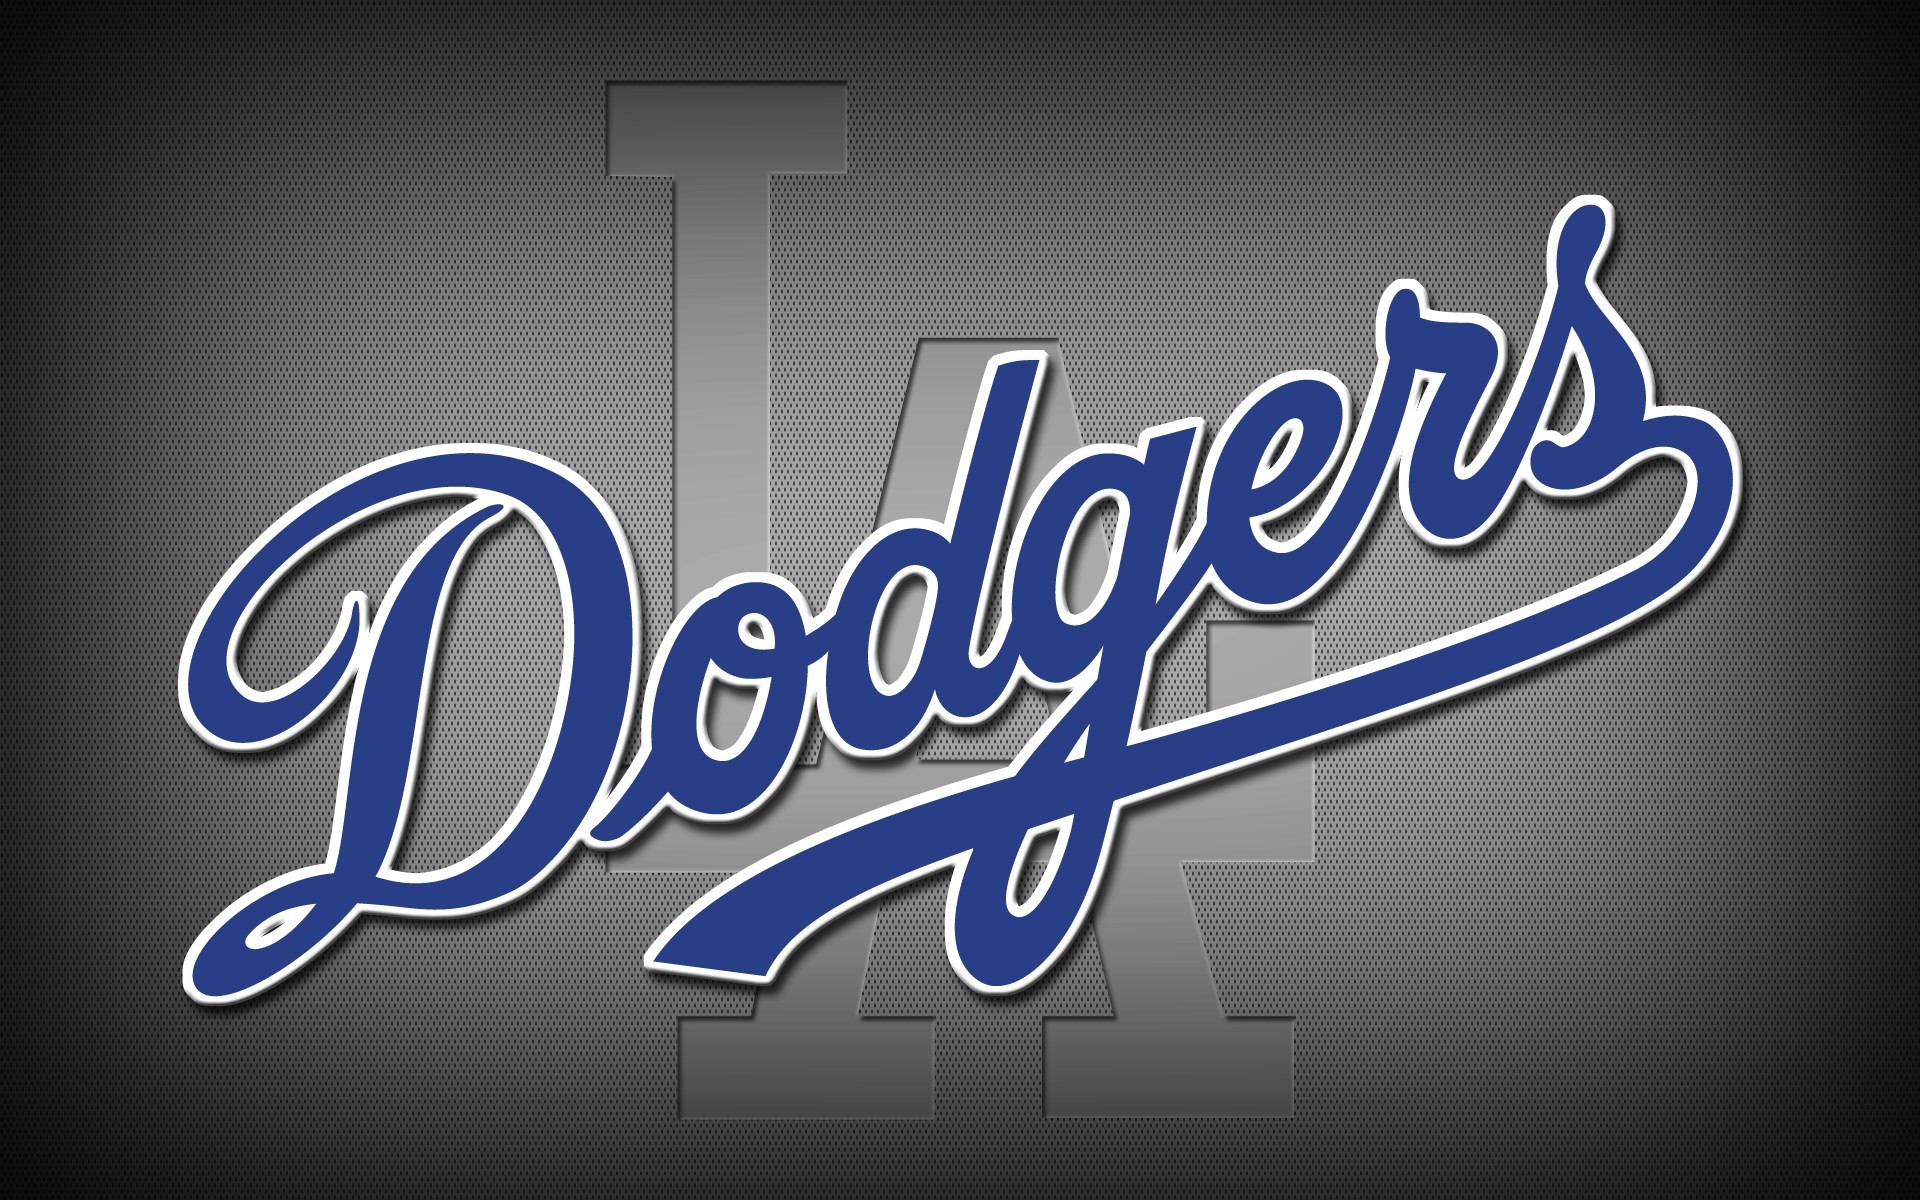 Los Angeles Dodgers Wallpaper IPhone (67+ images)